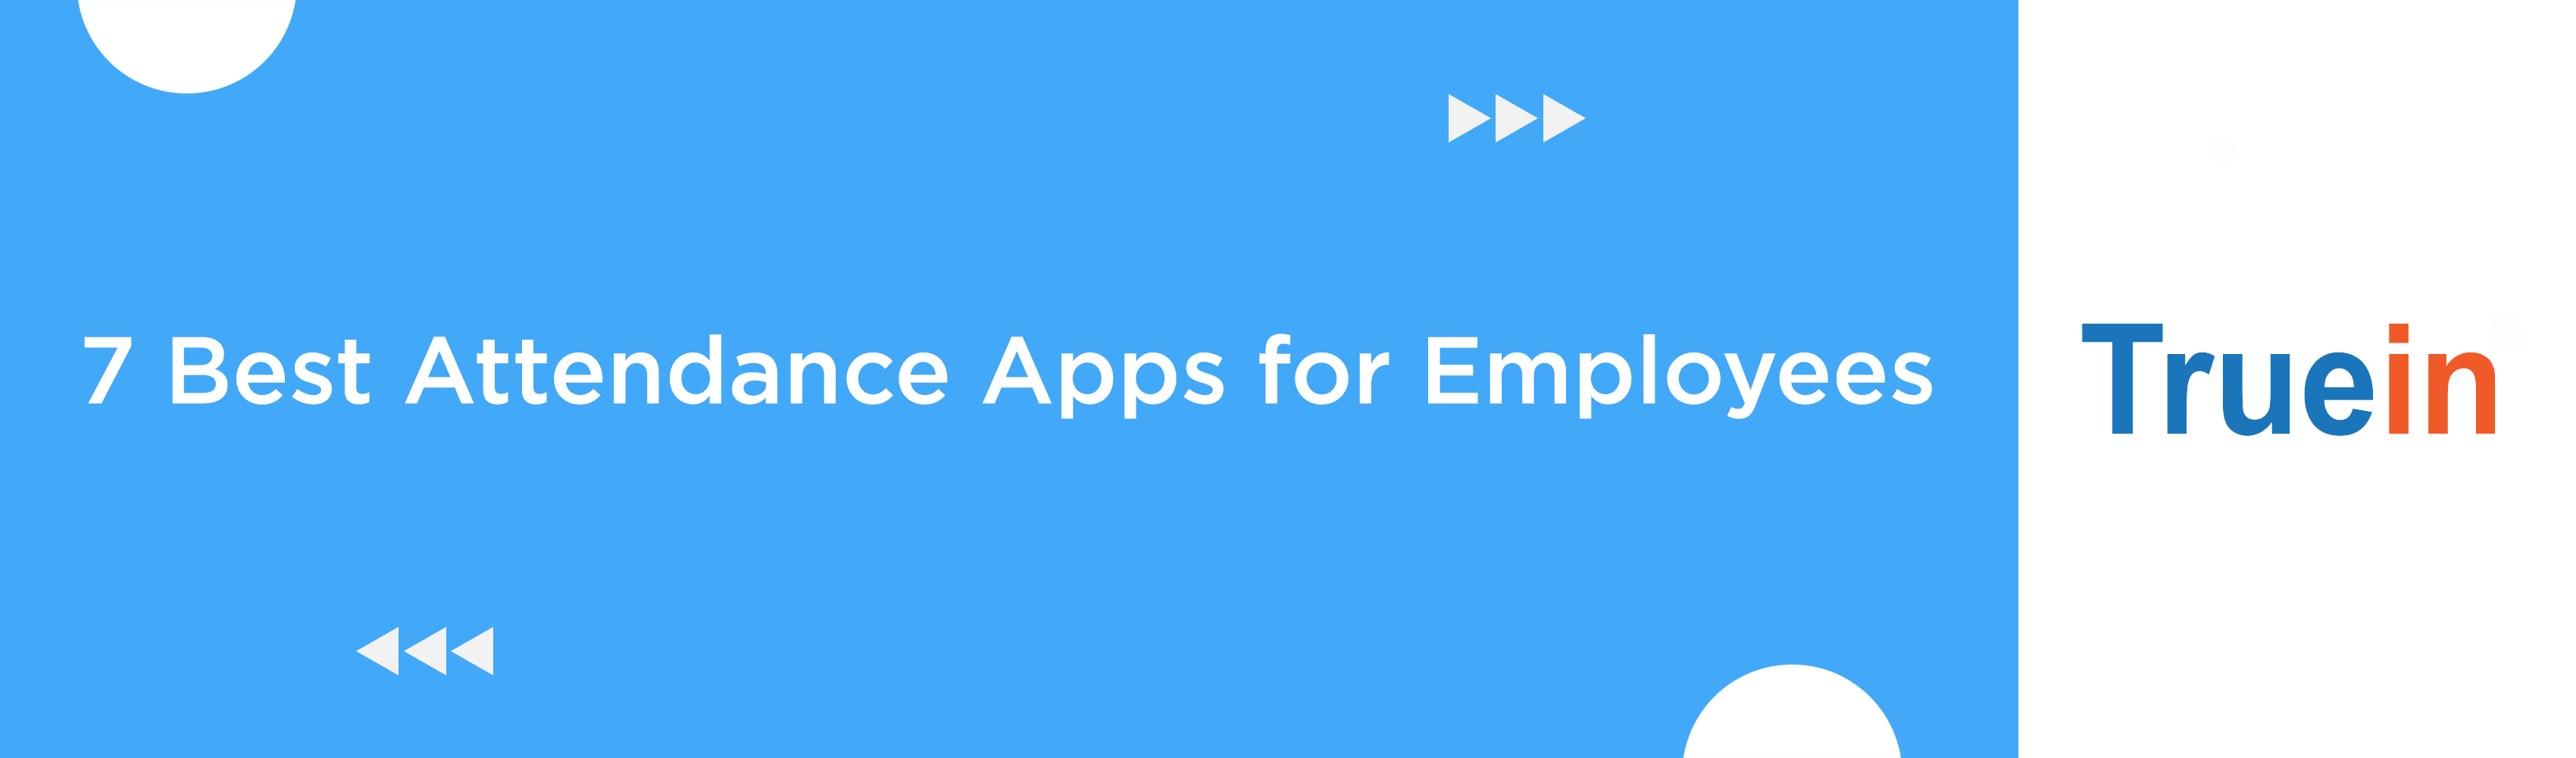 8 Best Attendance Apps for Employees